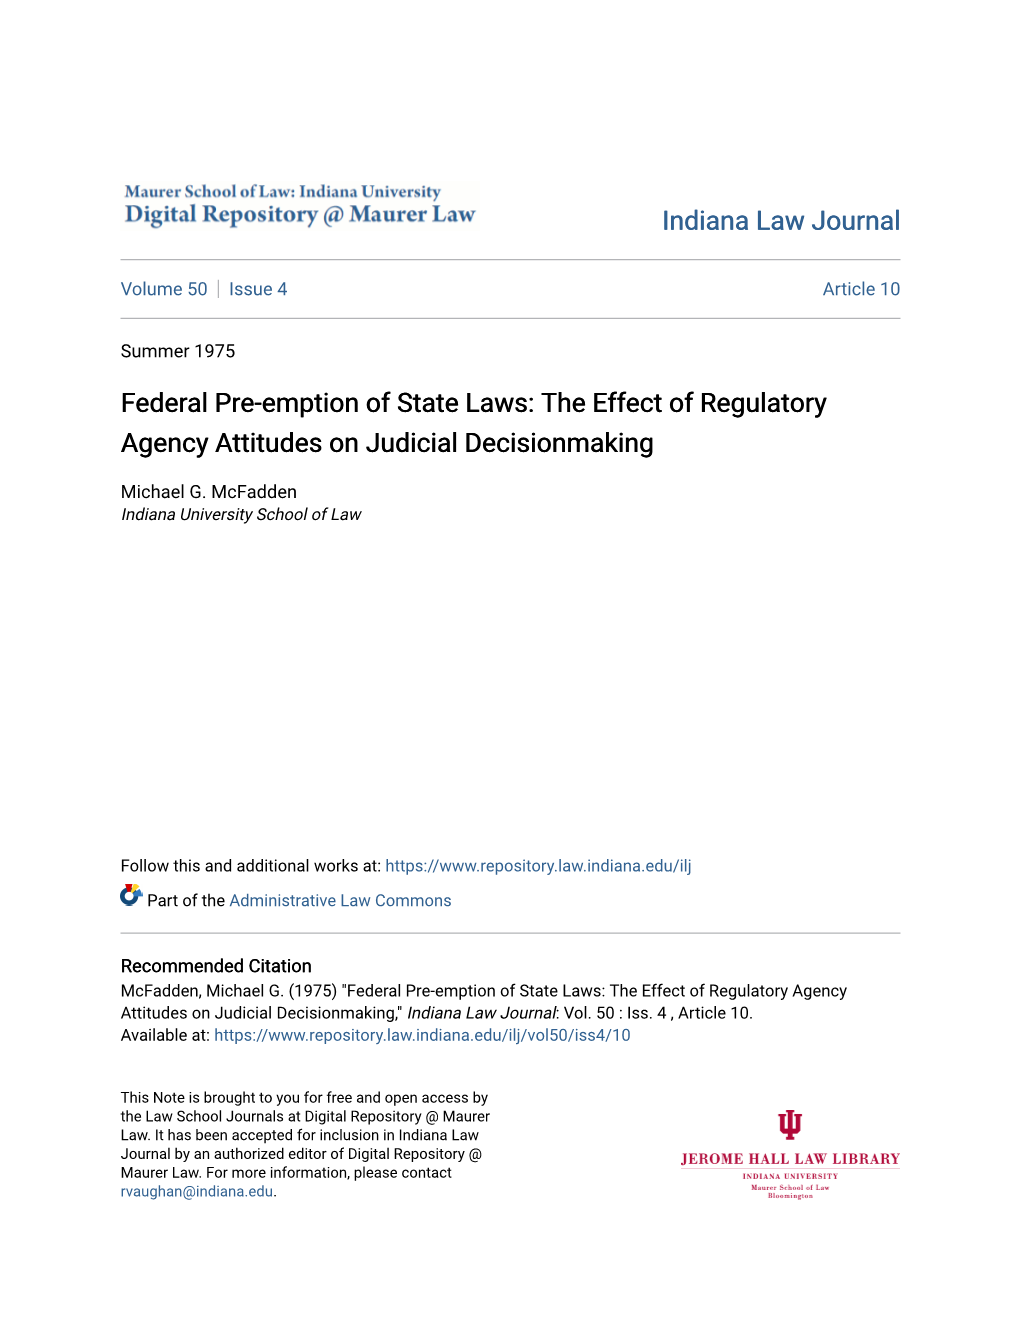 Federal Pre-Emption of State Laws: the Effect of Regulatory Agency Attitudes on Judicial Decisionmaking